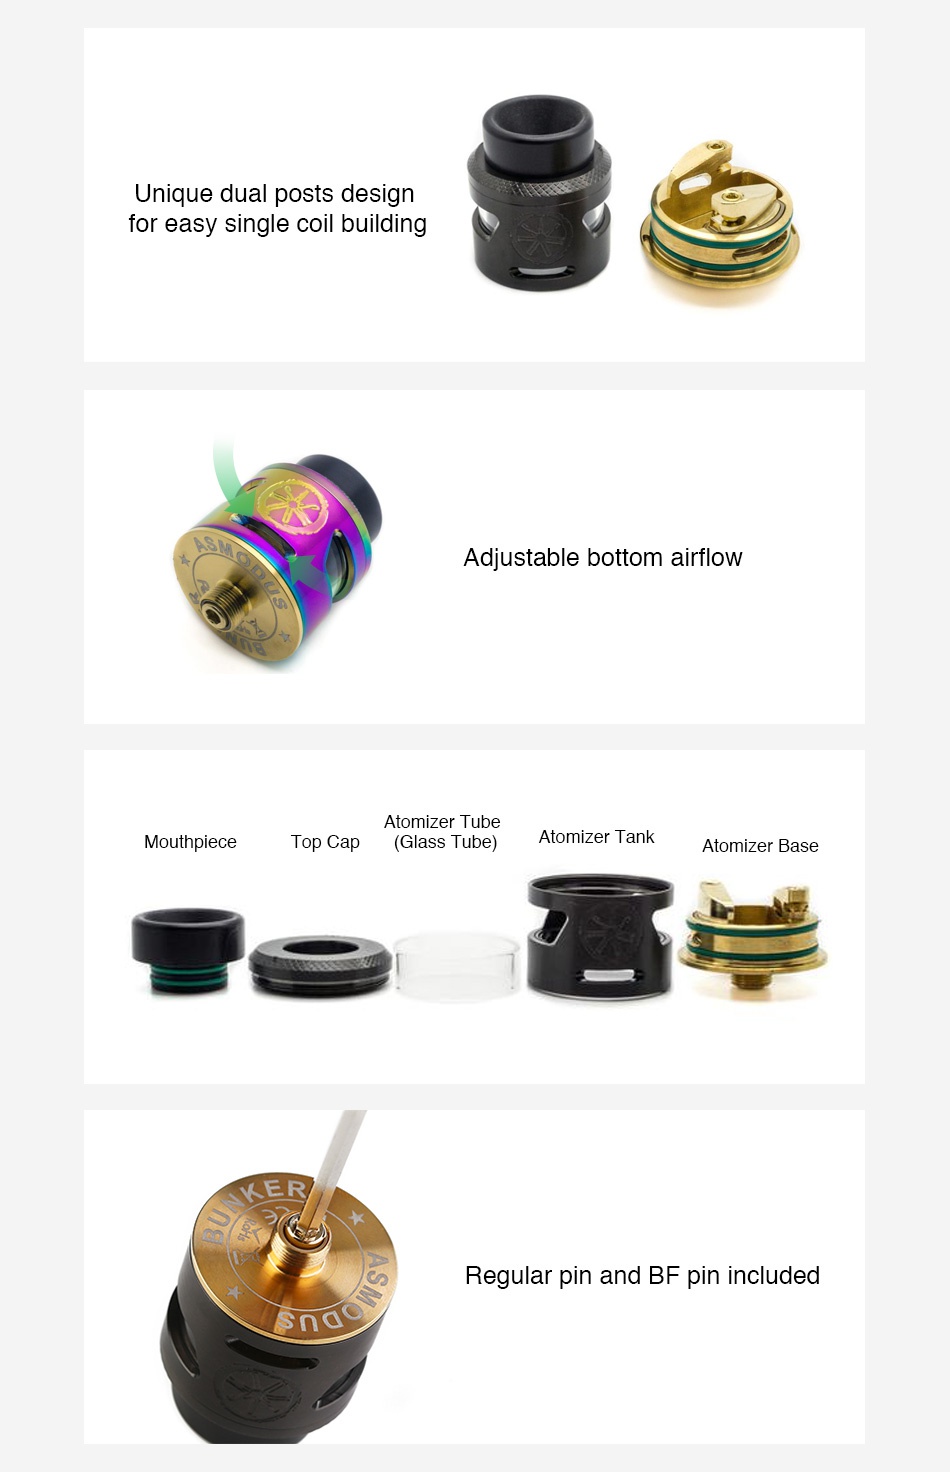 Asmodus Bunker BF RDA Unique dual posts design for easy single coil building Adjustable bottom airflow Atomizer tube plece Top Cap  Glass Tube  Atomizer I ank Atomizer base ER Reqular pin and bf pin included